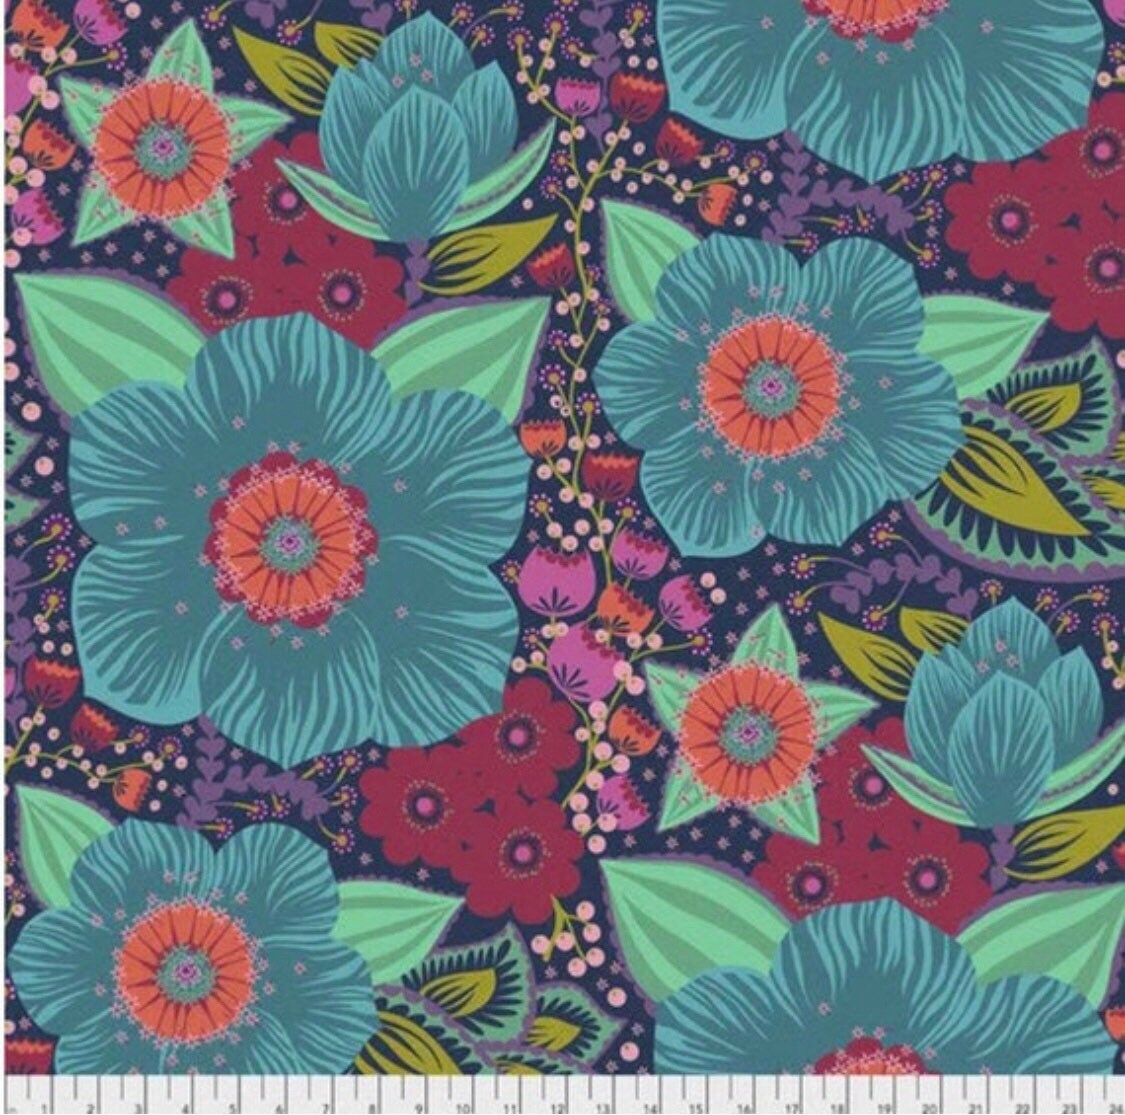 Honorable Mention - Turquoise - 108 Wide - Bright Eyes Collection by Anna Maria Horner - Free Spirit Fabrics - 100% Cotton